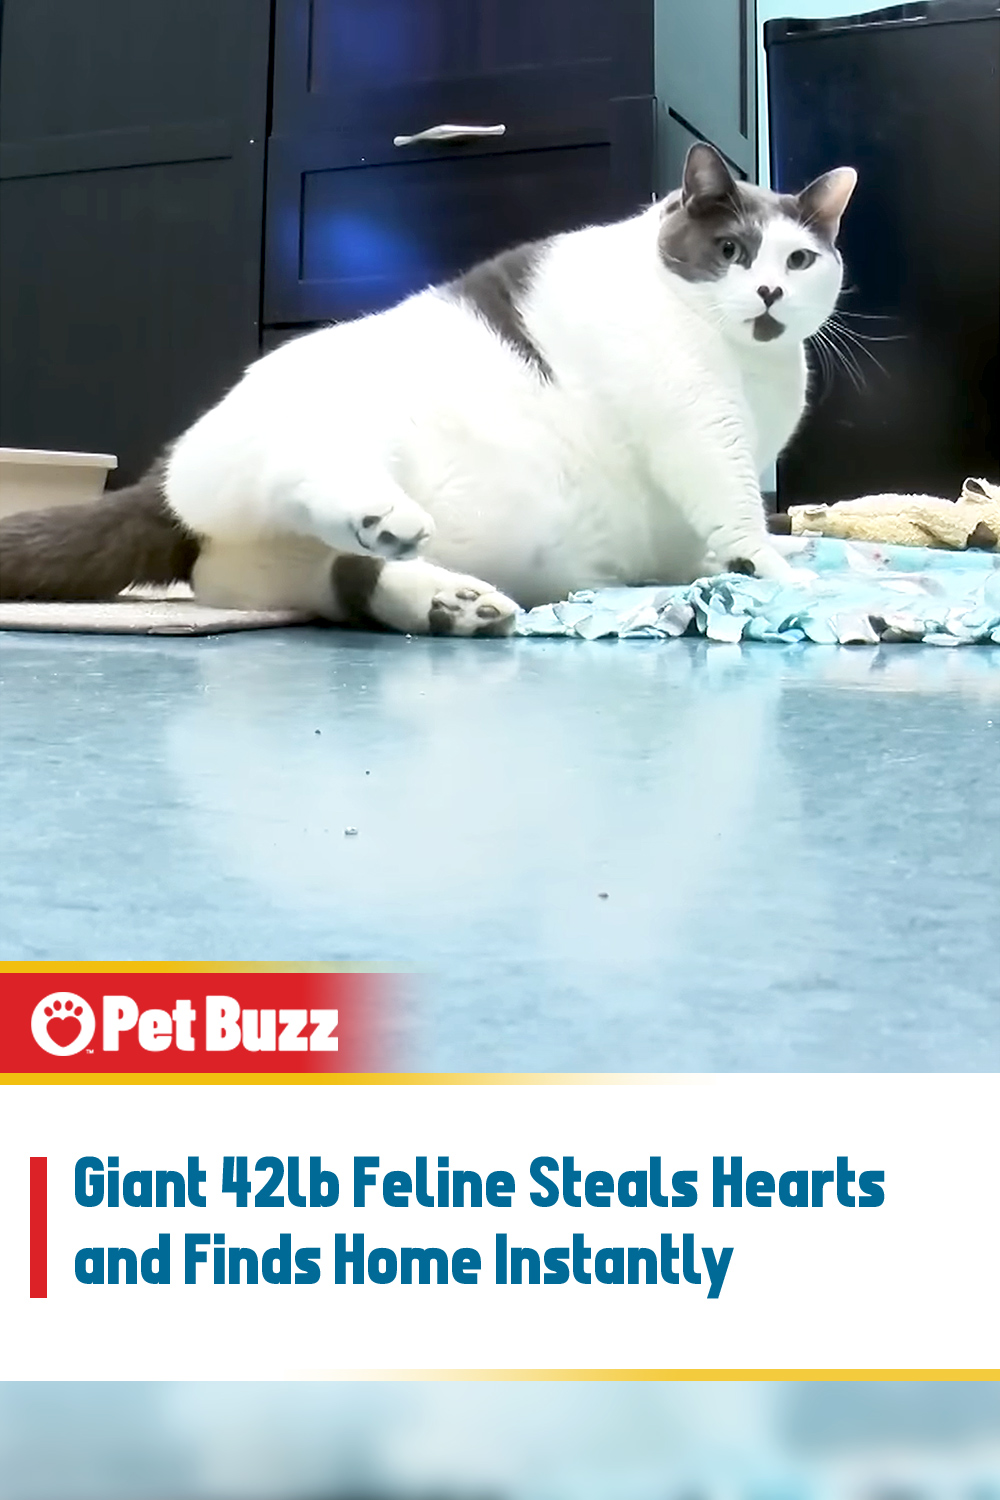 Giant 42lb Feline Steals Hearts and Finds Home Instantly